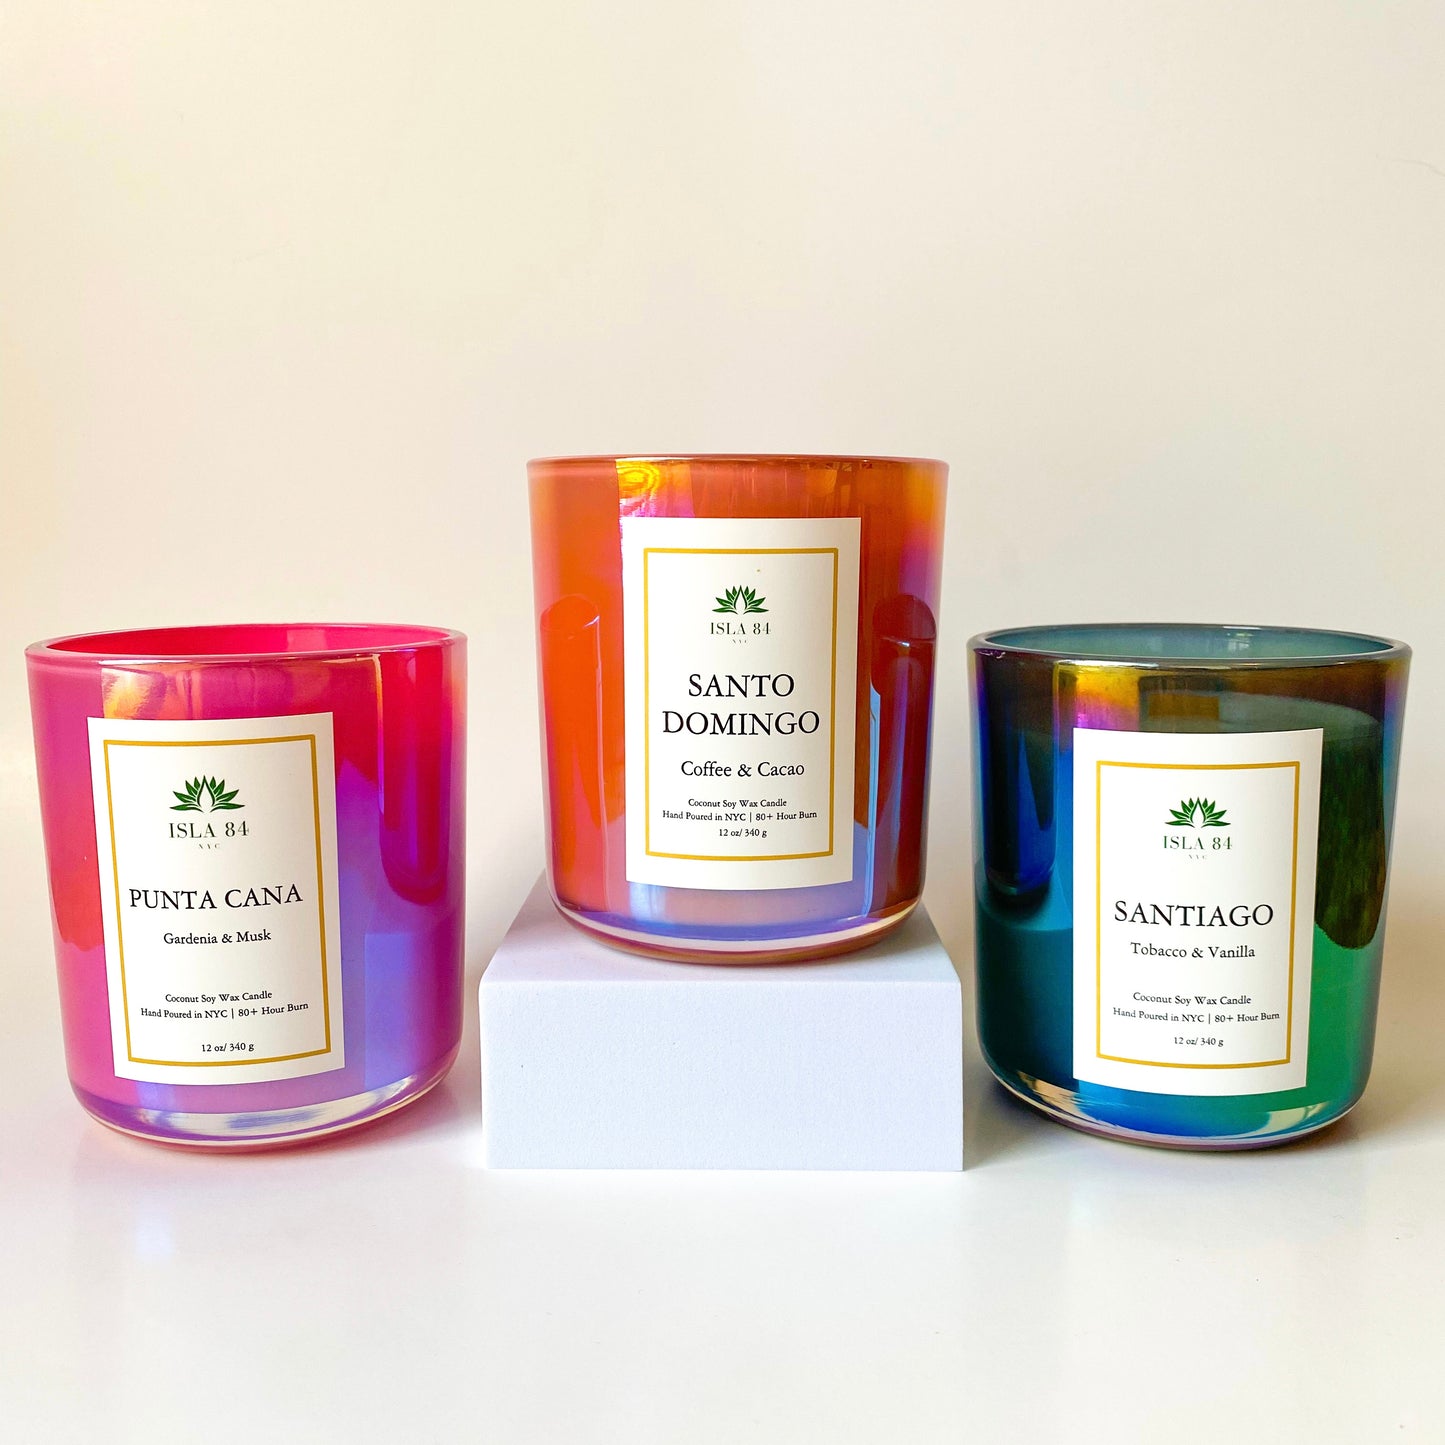 Punta Cana, Santo Domingo and Santiago Signature Scented Candles; White labels with green logo; iridescent vessels/containers; Hot Pink, Brown, and Black/green candle vessels. Coconut Soy Wax with Wood Wick